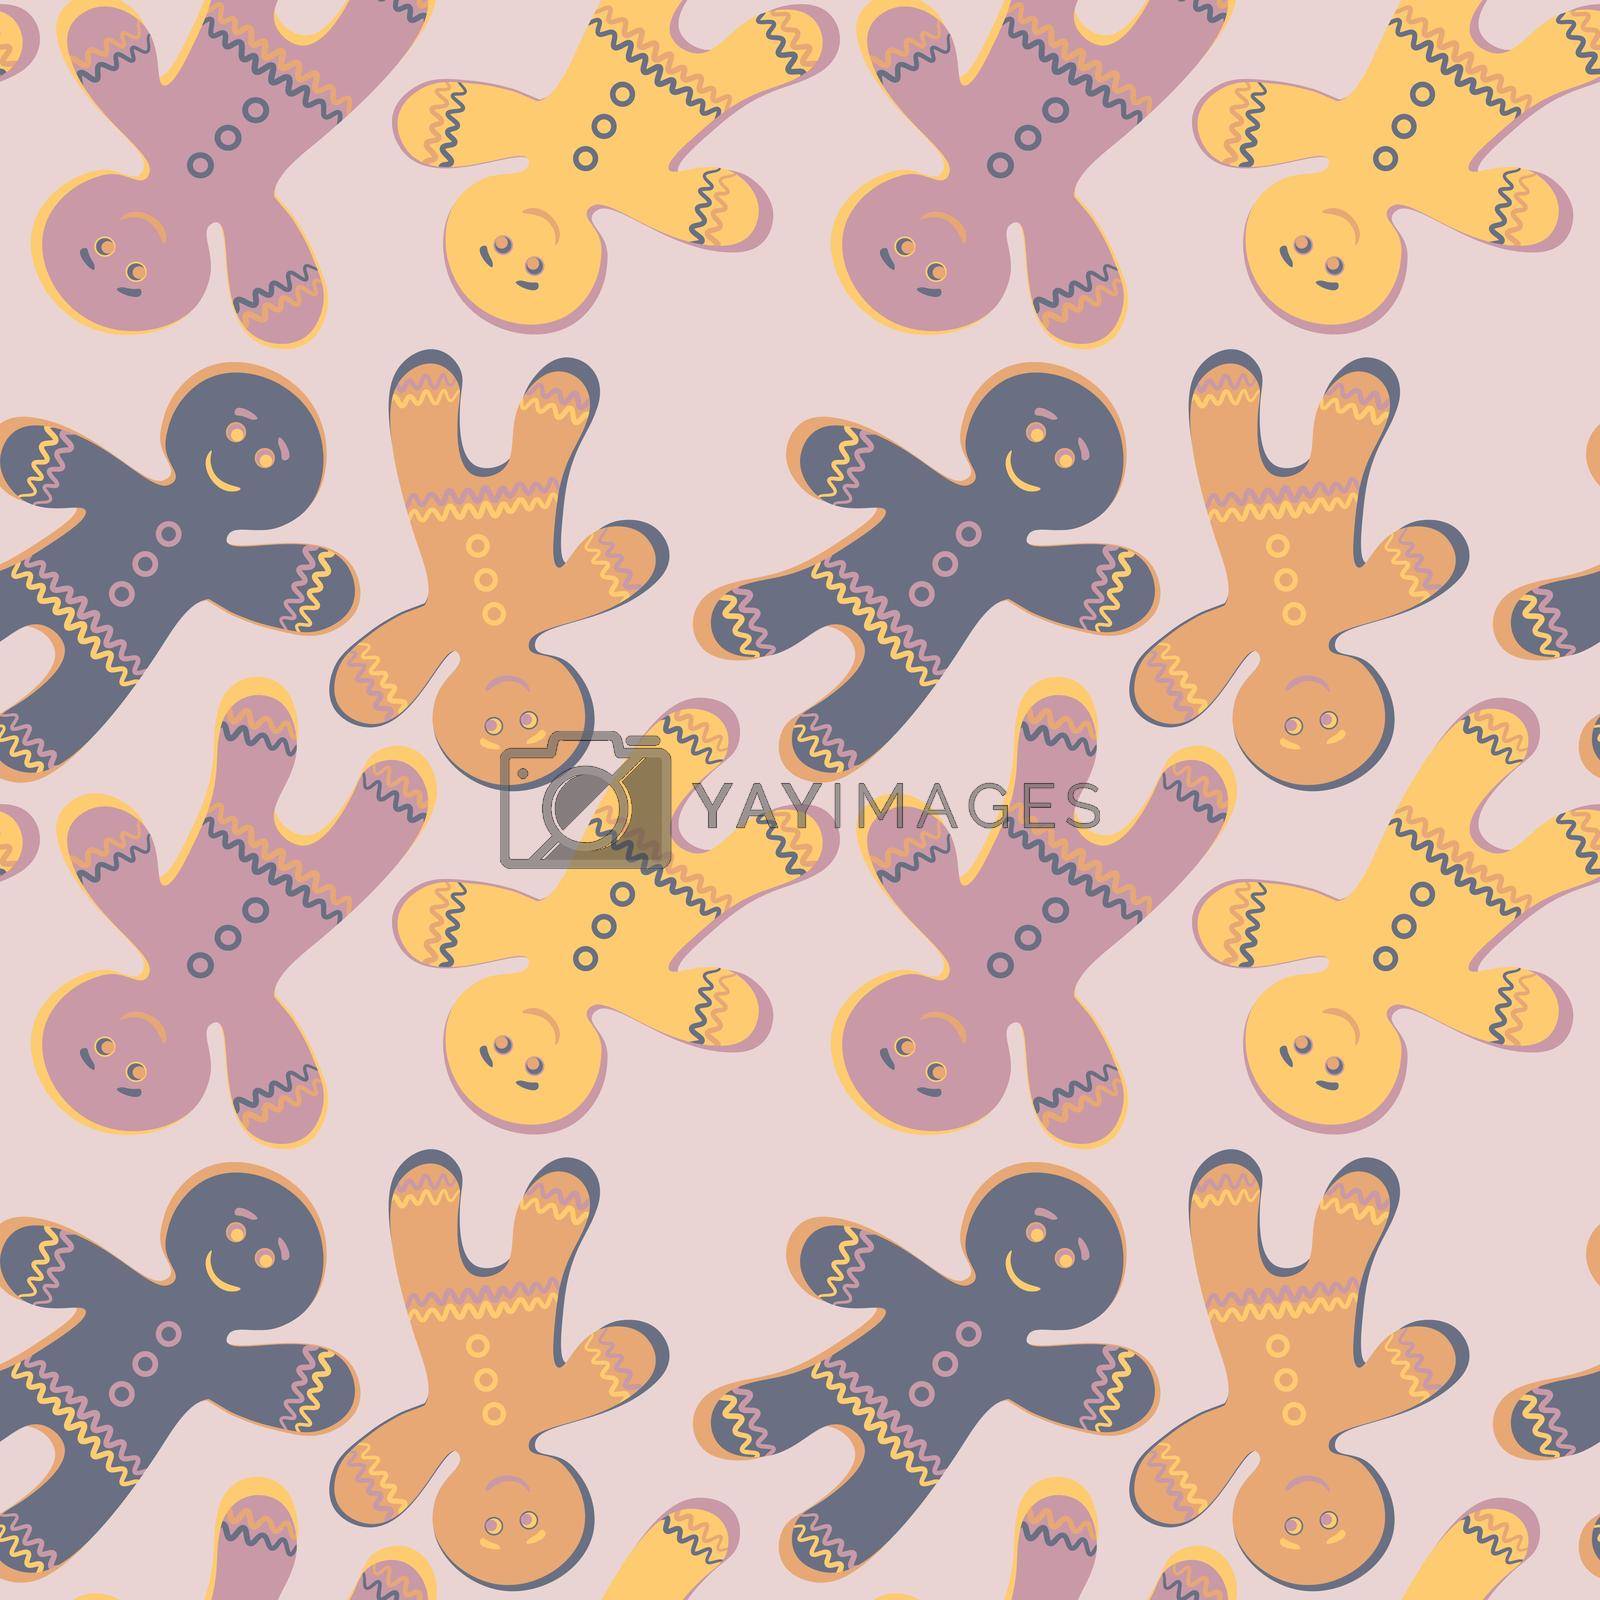 Royalty free image of a gingerbread man, a festive curly cookie. Design element by p-i-r-a-n-y-a